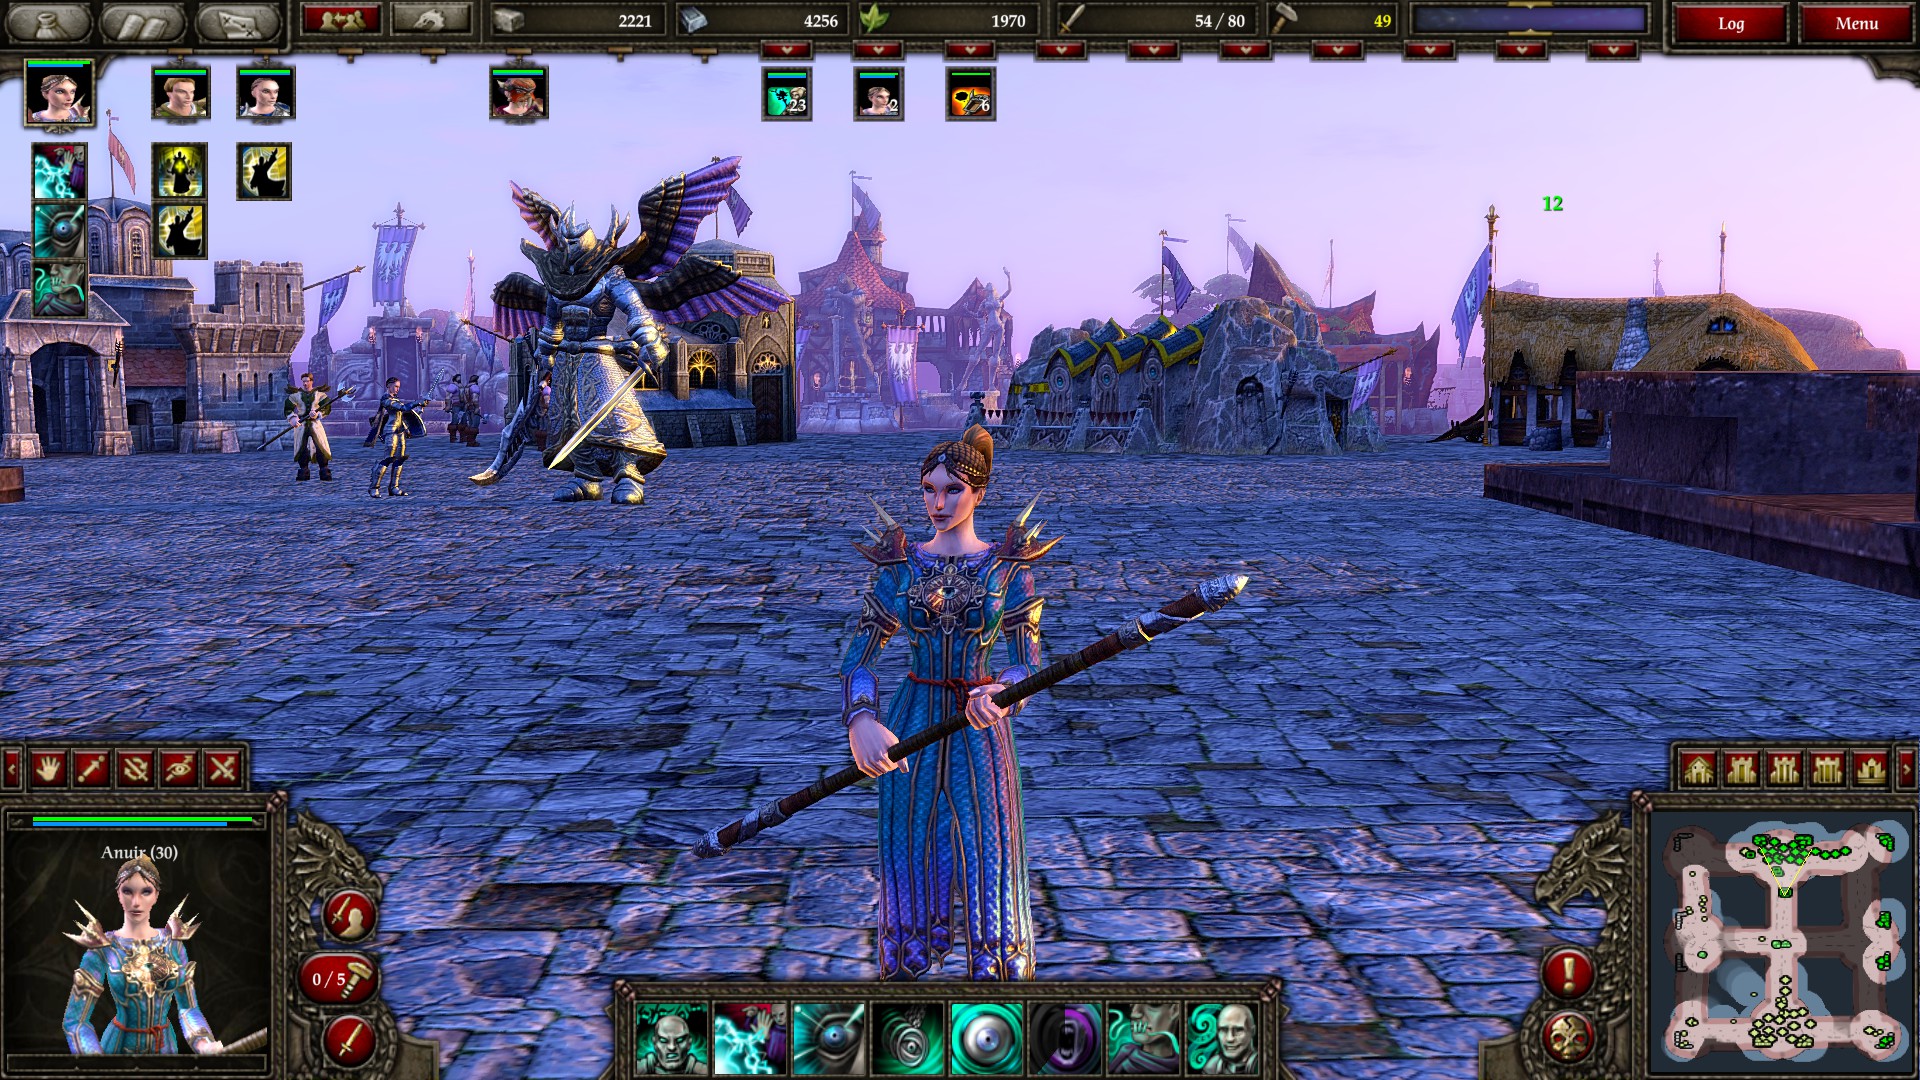 download the new SpellForce: Conquest of Eo